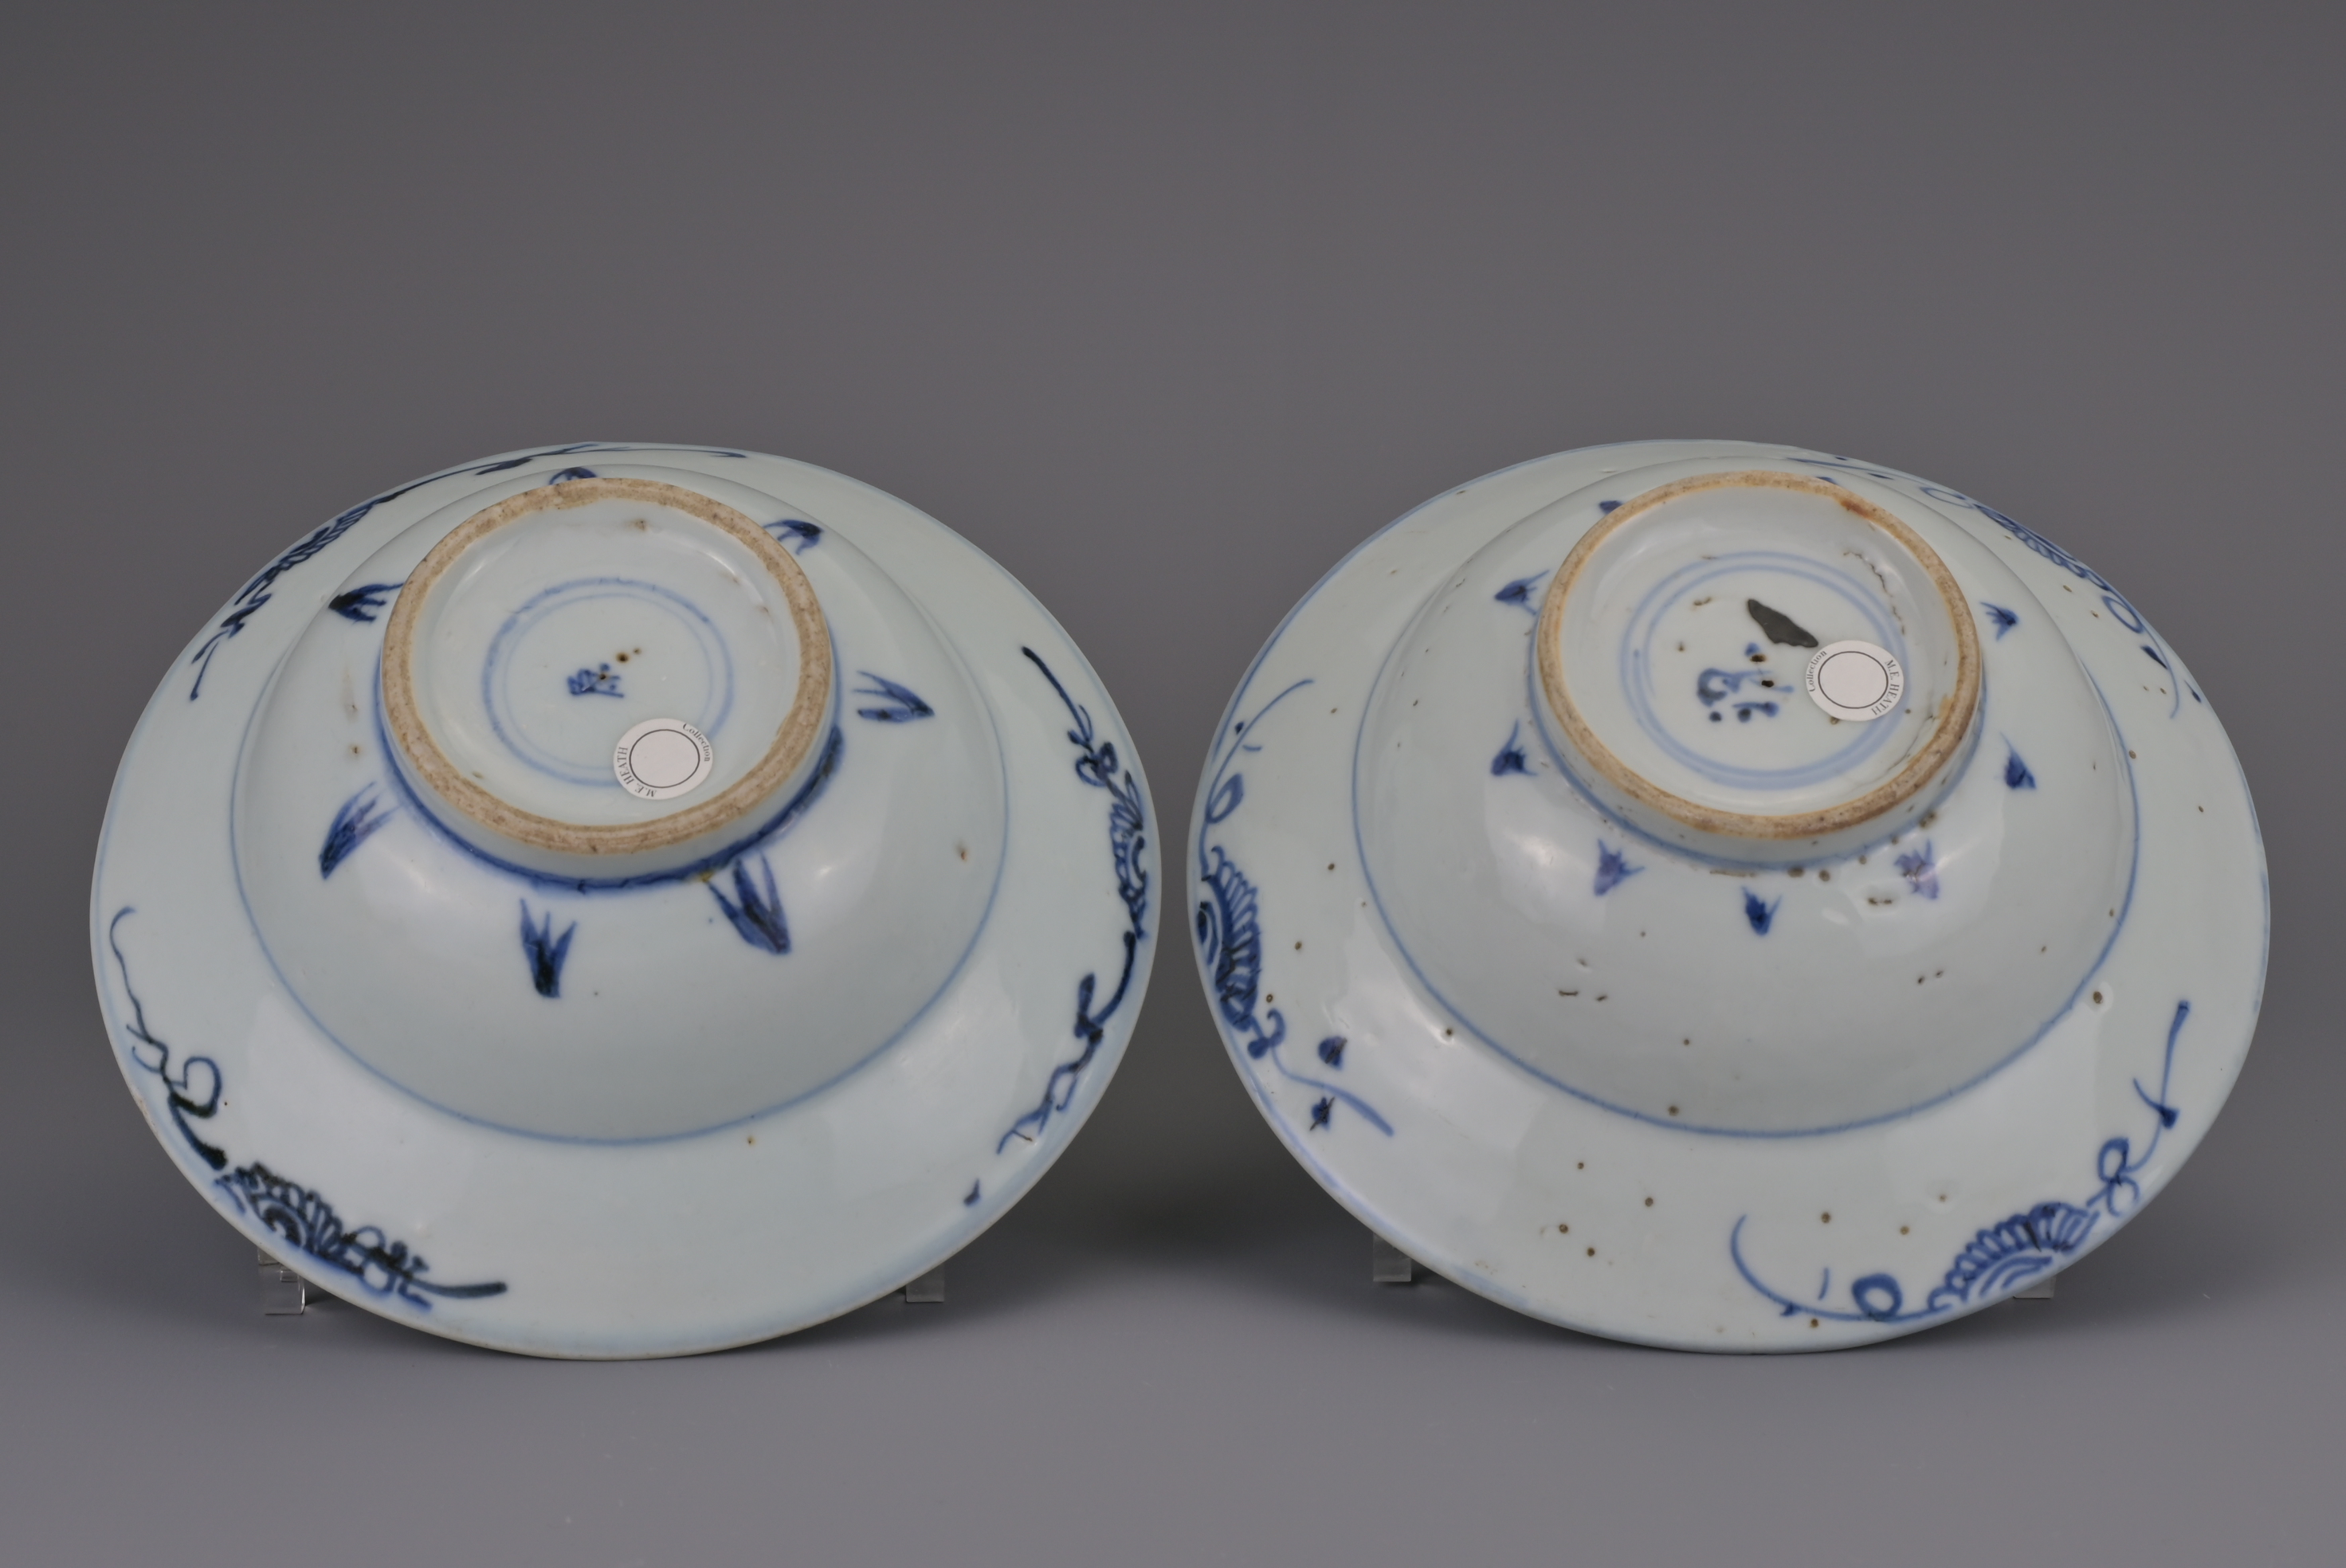 A PAIR OF CHINESE BLUE AND WHITE PORCELAIN KLAPMUTS BOWLS, LATE MING/EARLY QING DYNASTY, 17TH CENTUR - Image 7 of 8